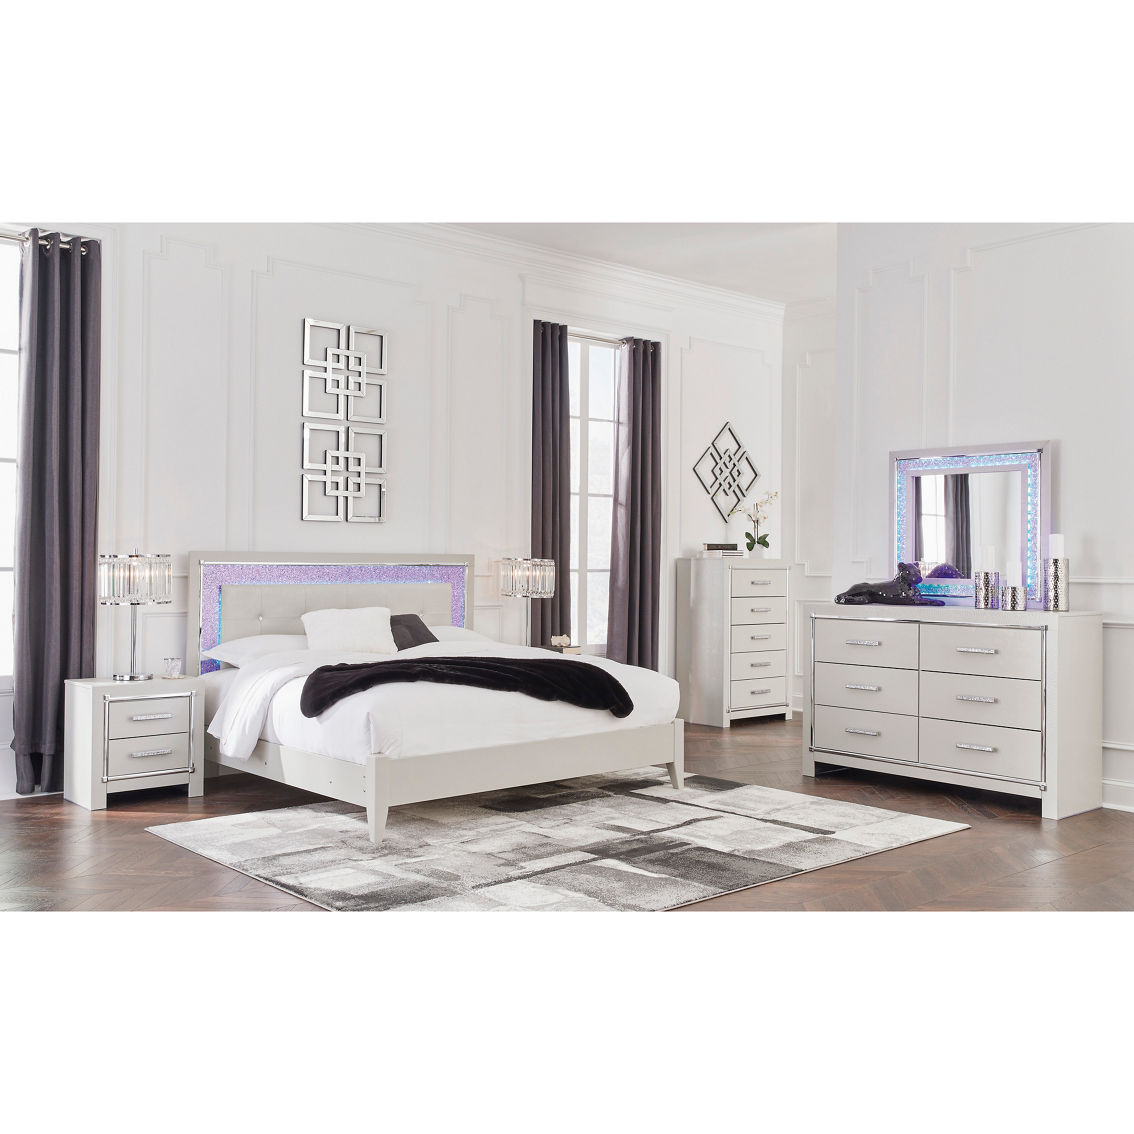 Signature Design by Ashley Zyniden 3 pc. Upholstered Bedroom Set - Image 8 of 8